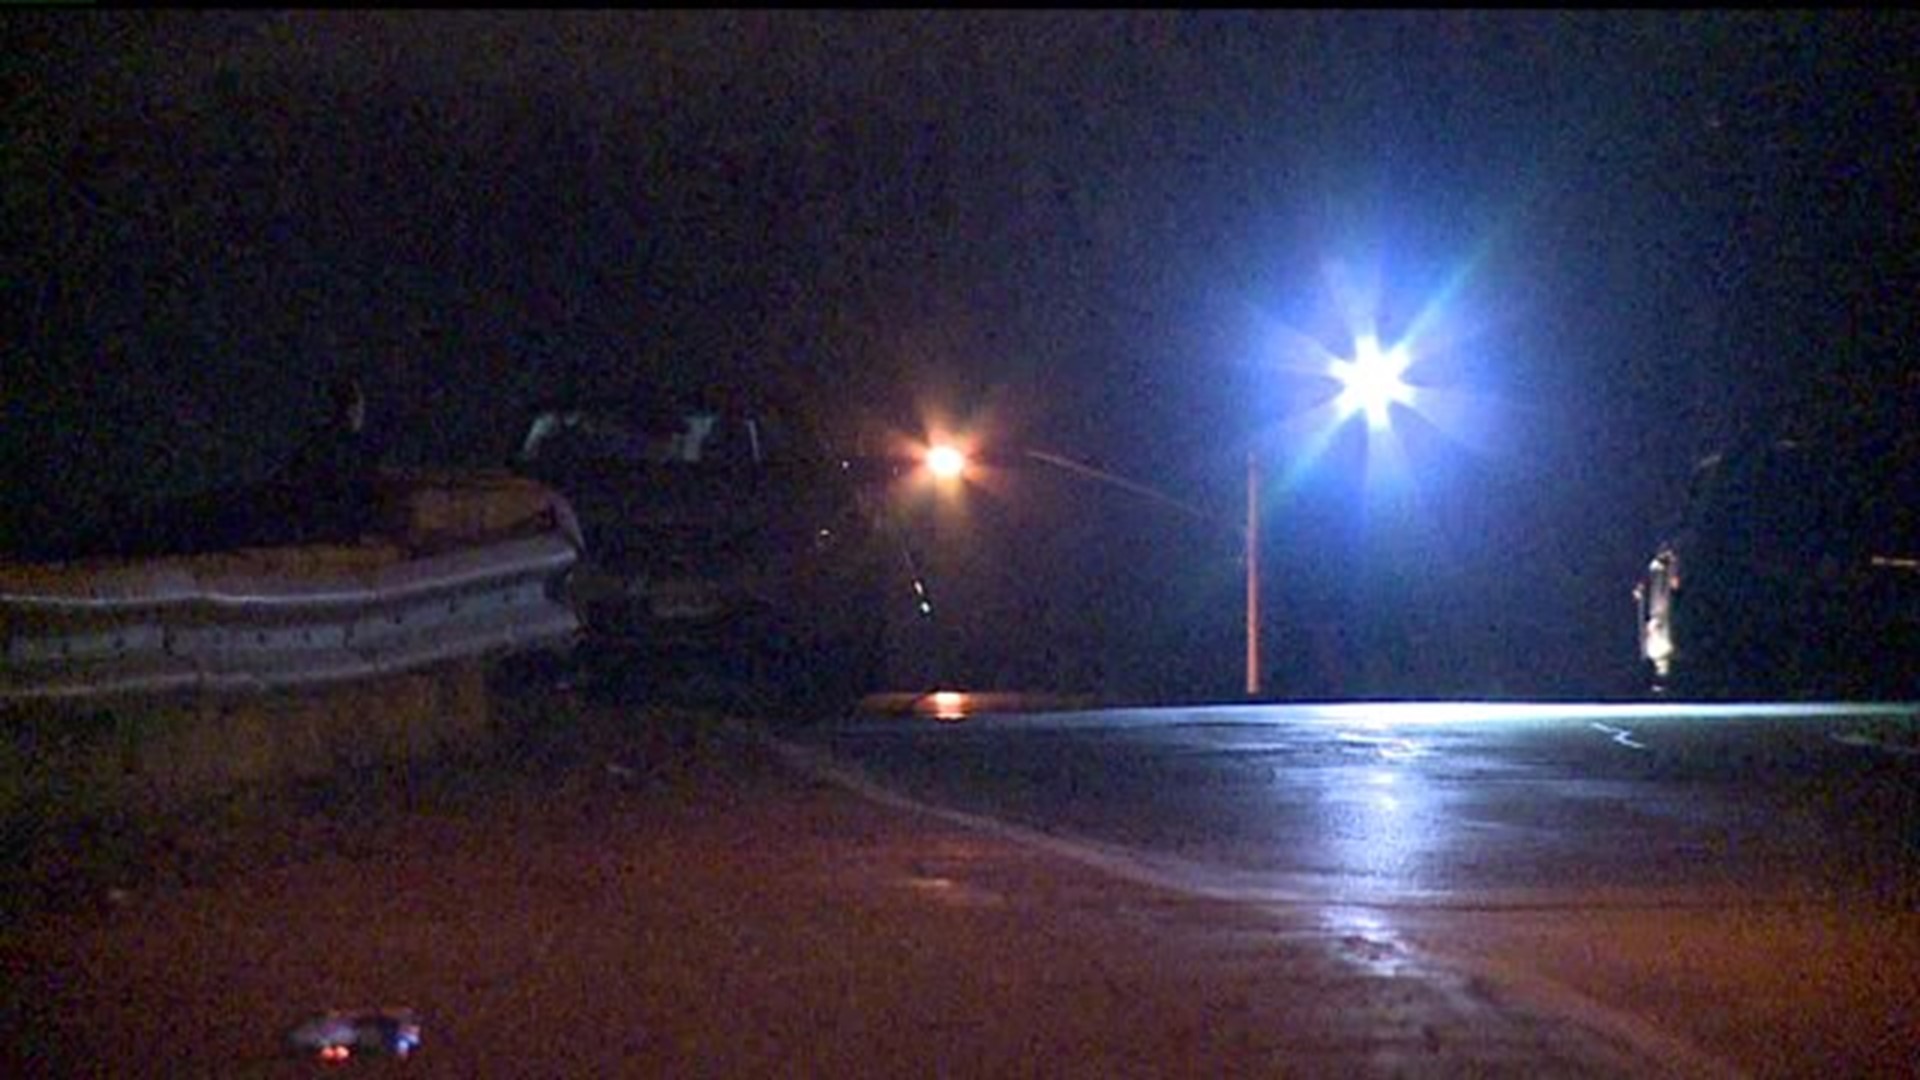 One person dies in Davenport accident